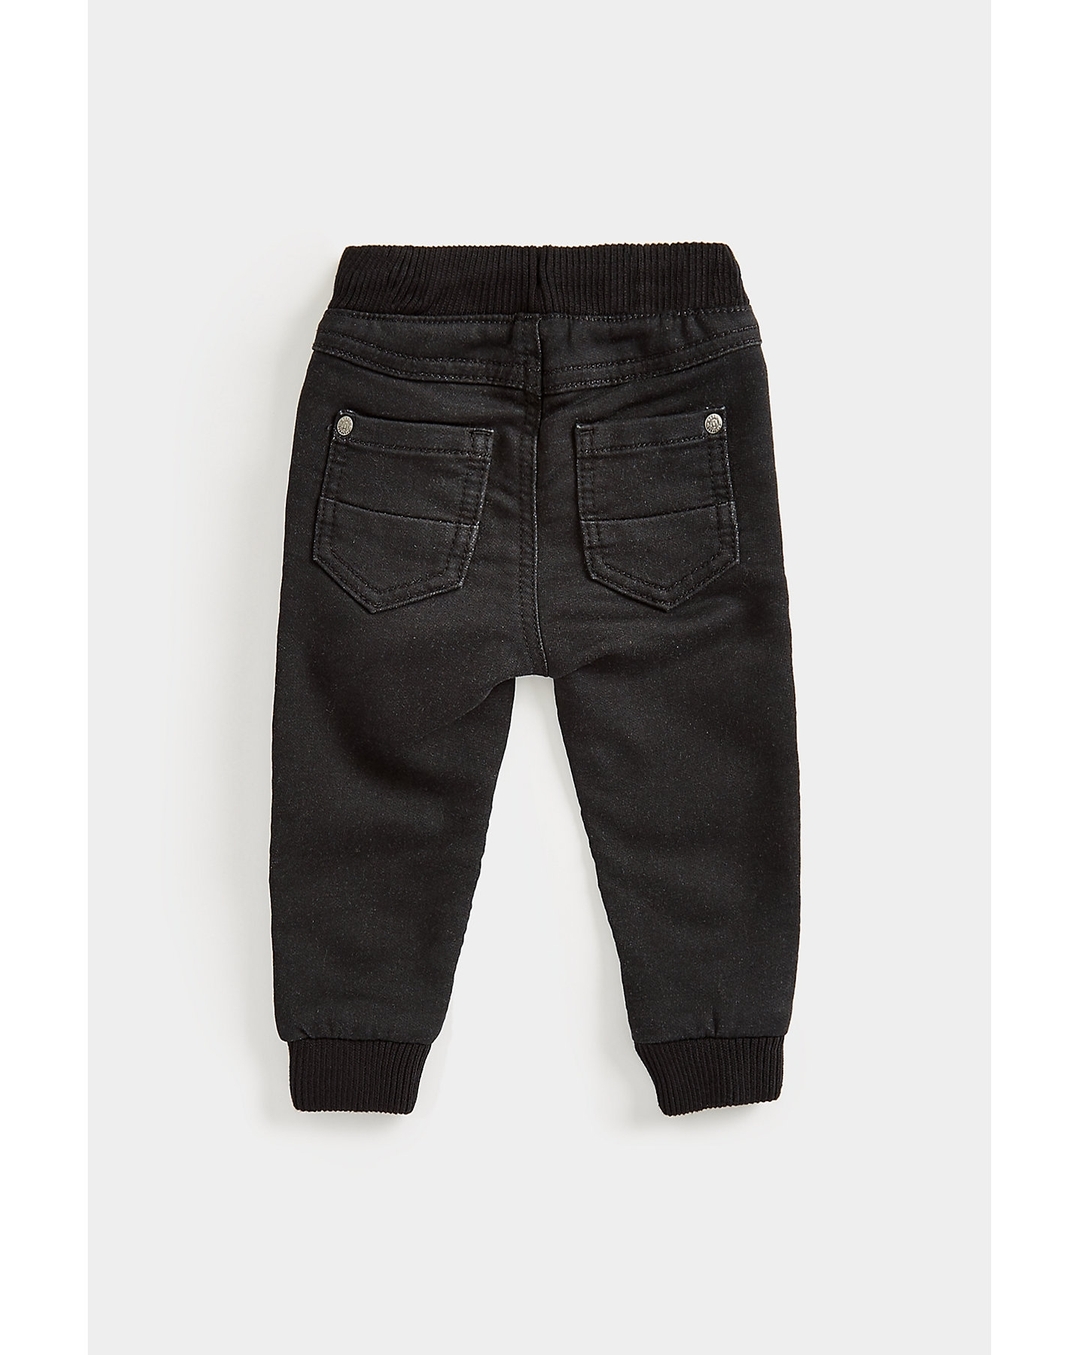 Boy's Jeans - Buy Jeans for Boys Online in India | Myntra